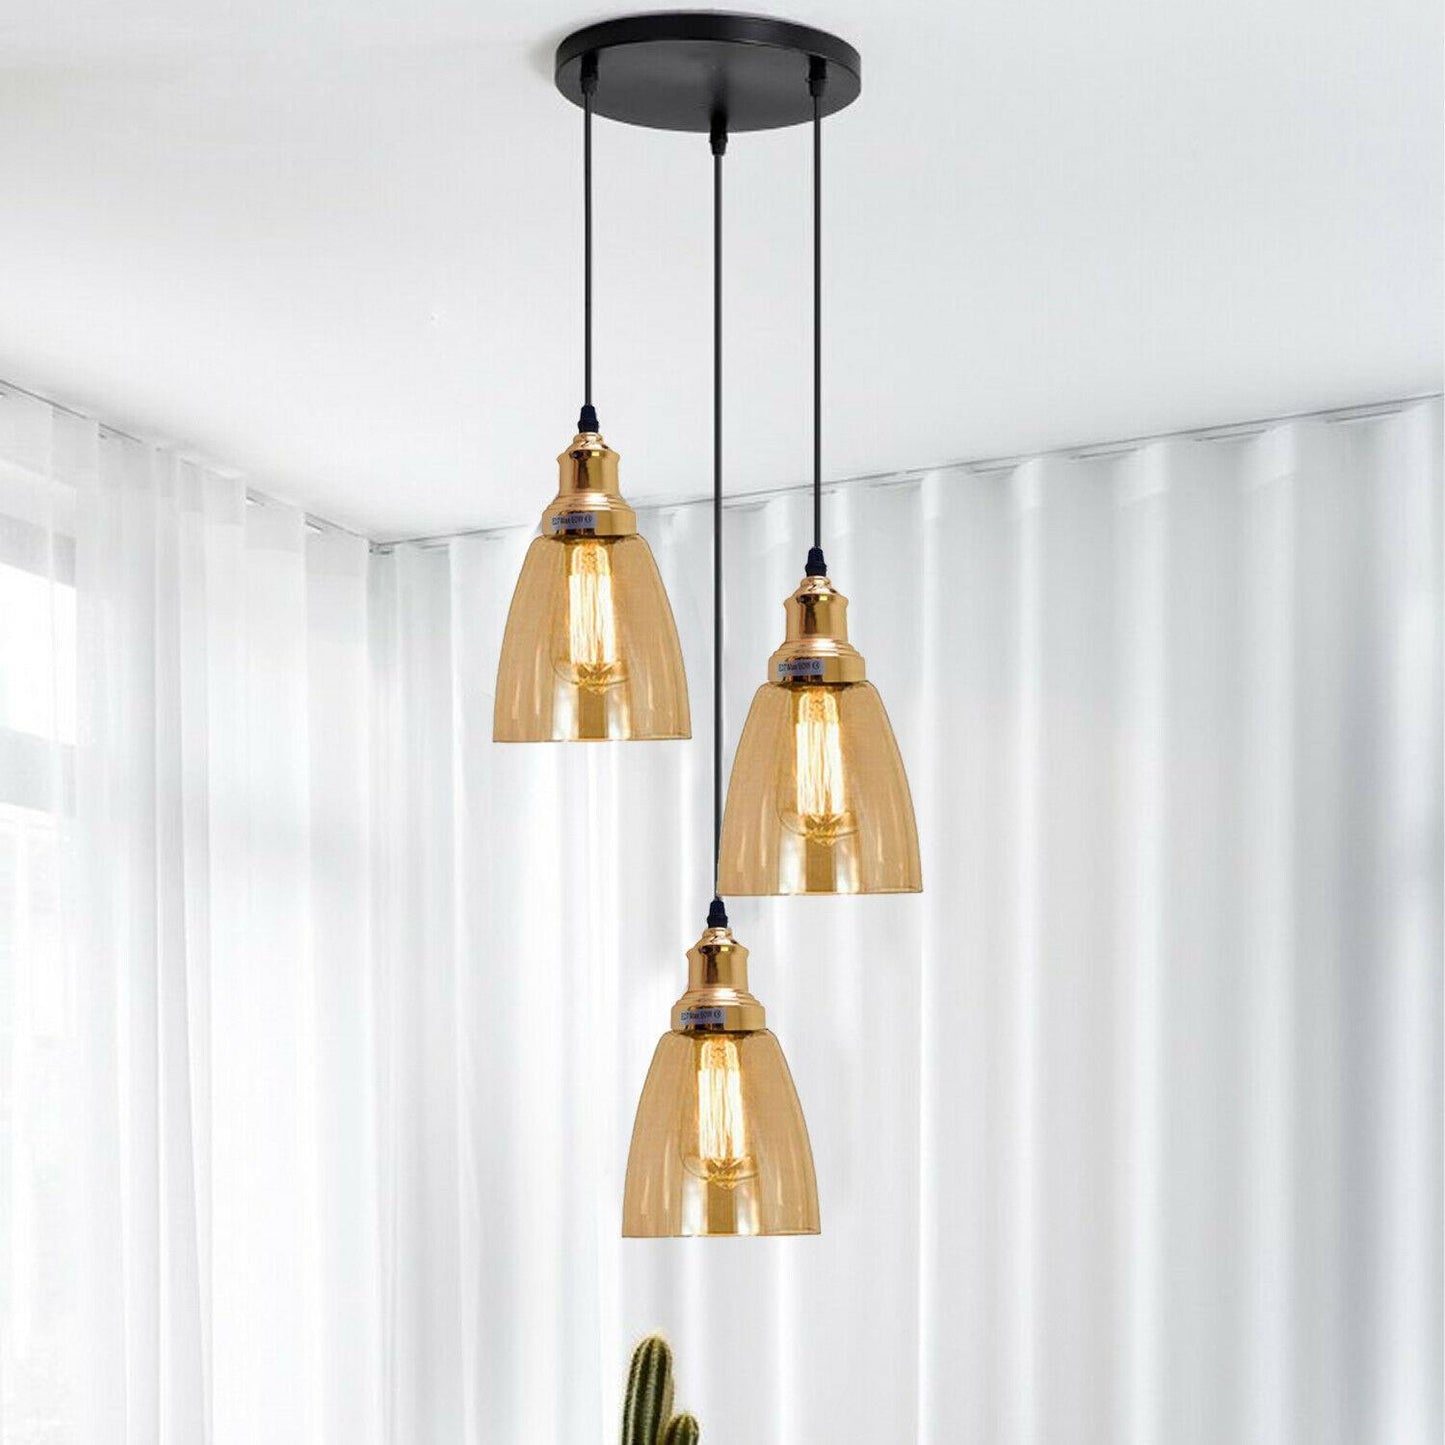 Vintage Multi Outlet Glass Ceiling Lampshade Pendant Light-Application Image